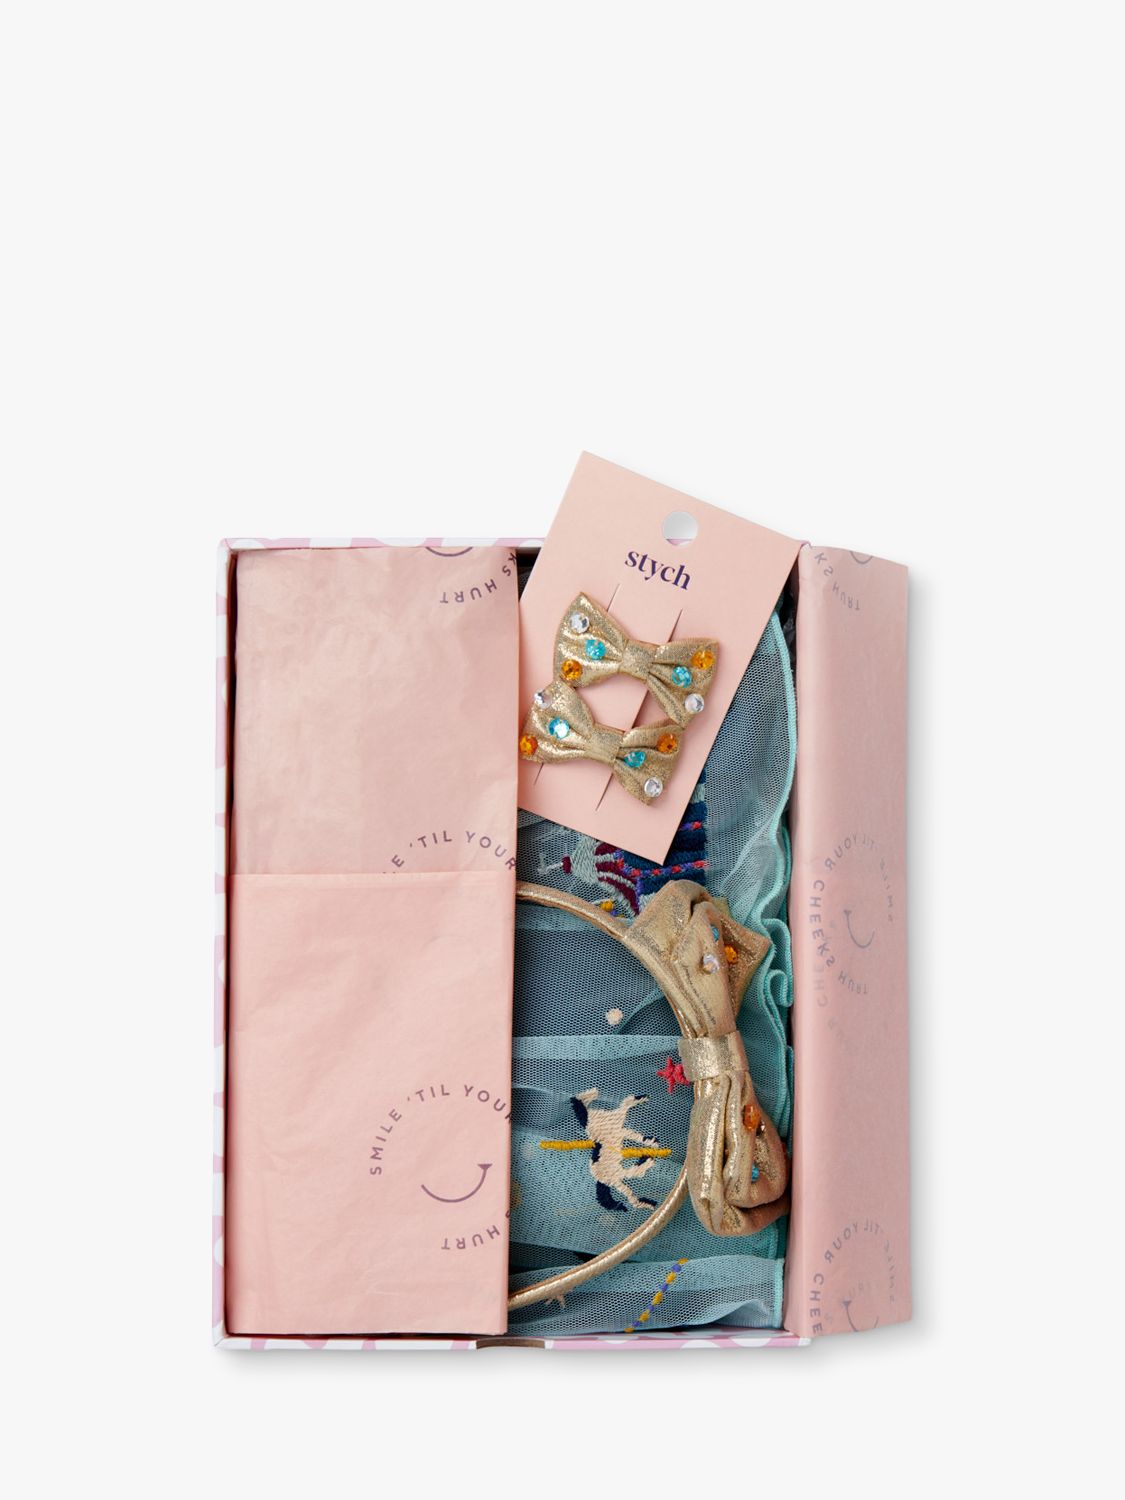 Buy Stych Kids' Once Upon A Time Dress Up Gift Box, Blue/Teal Online at johnlewis.com